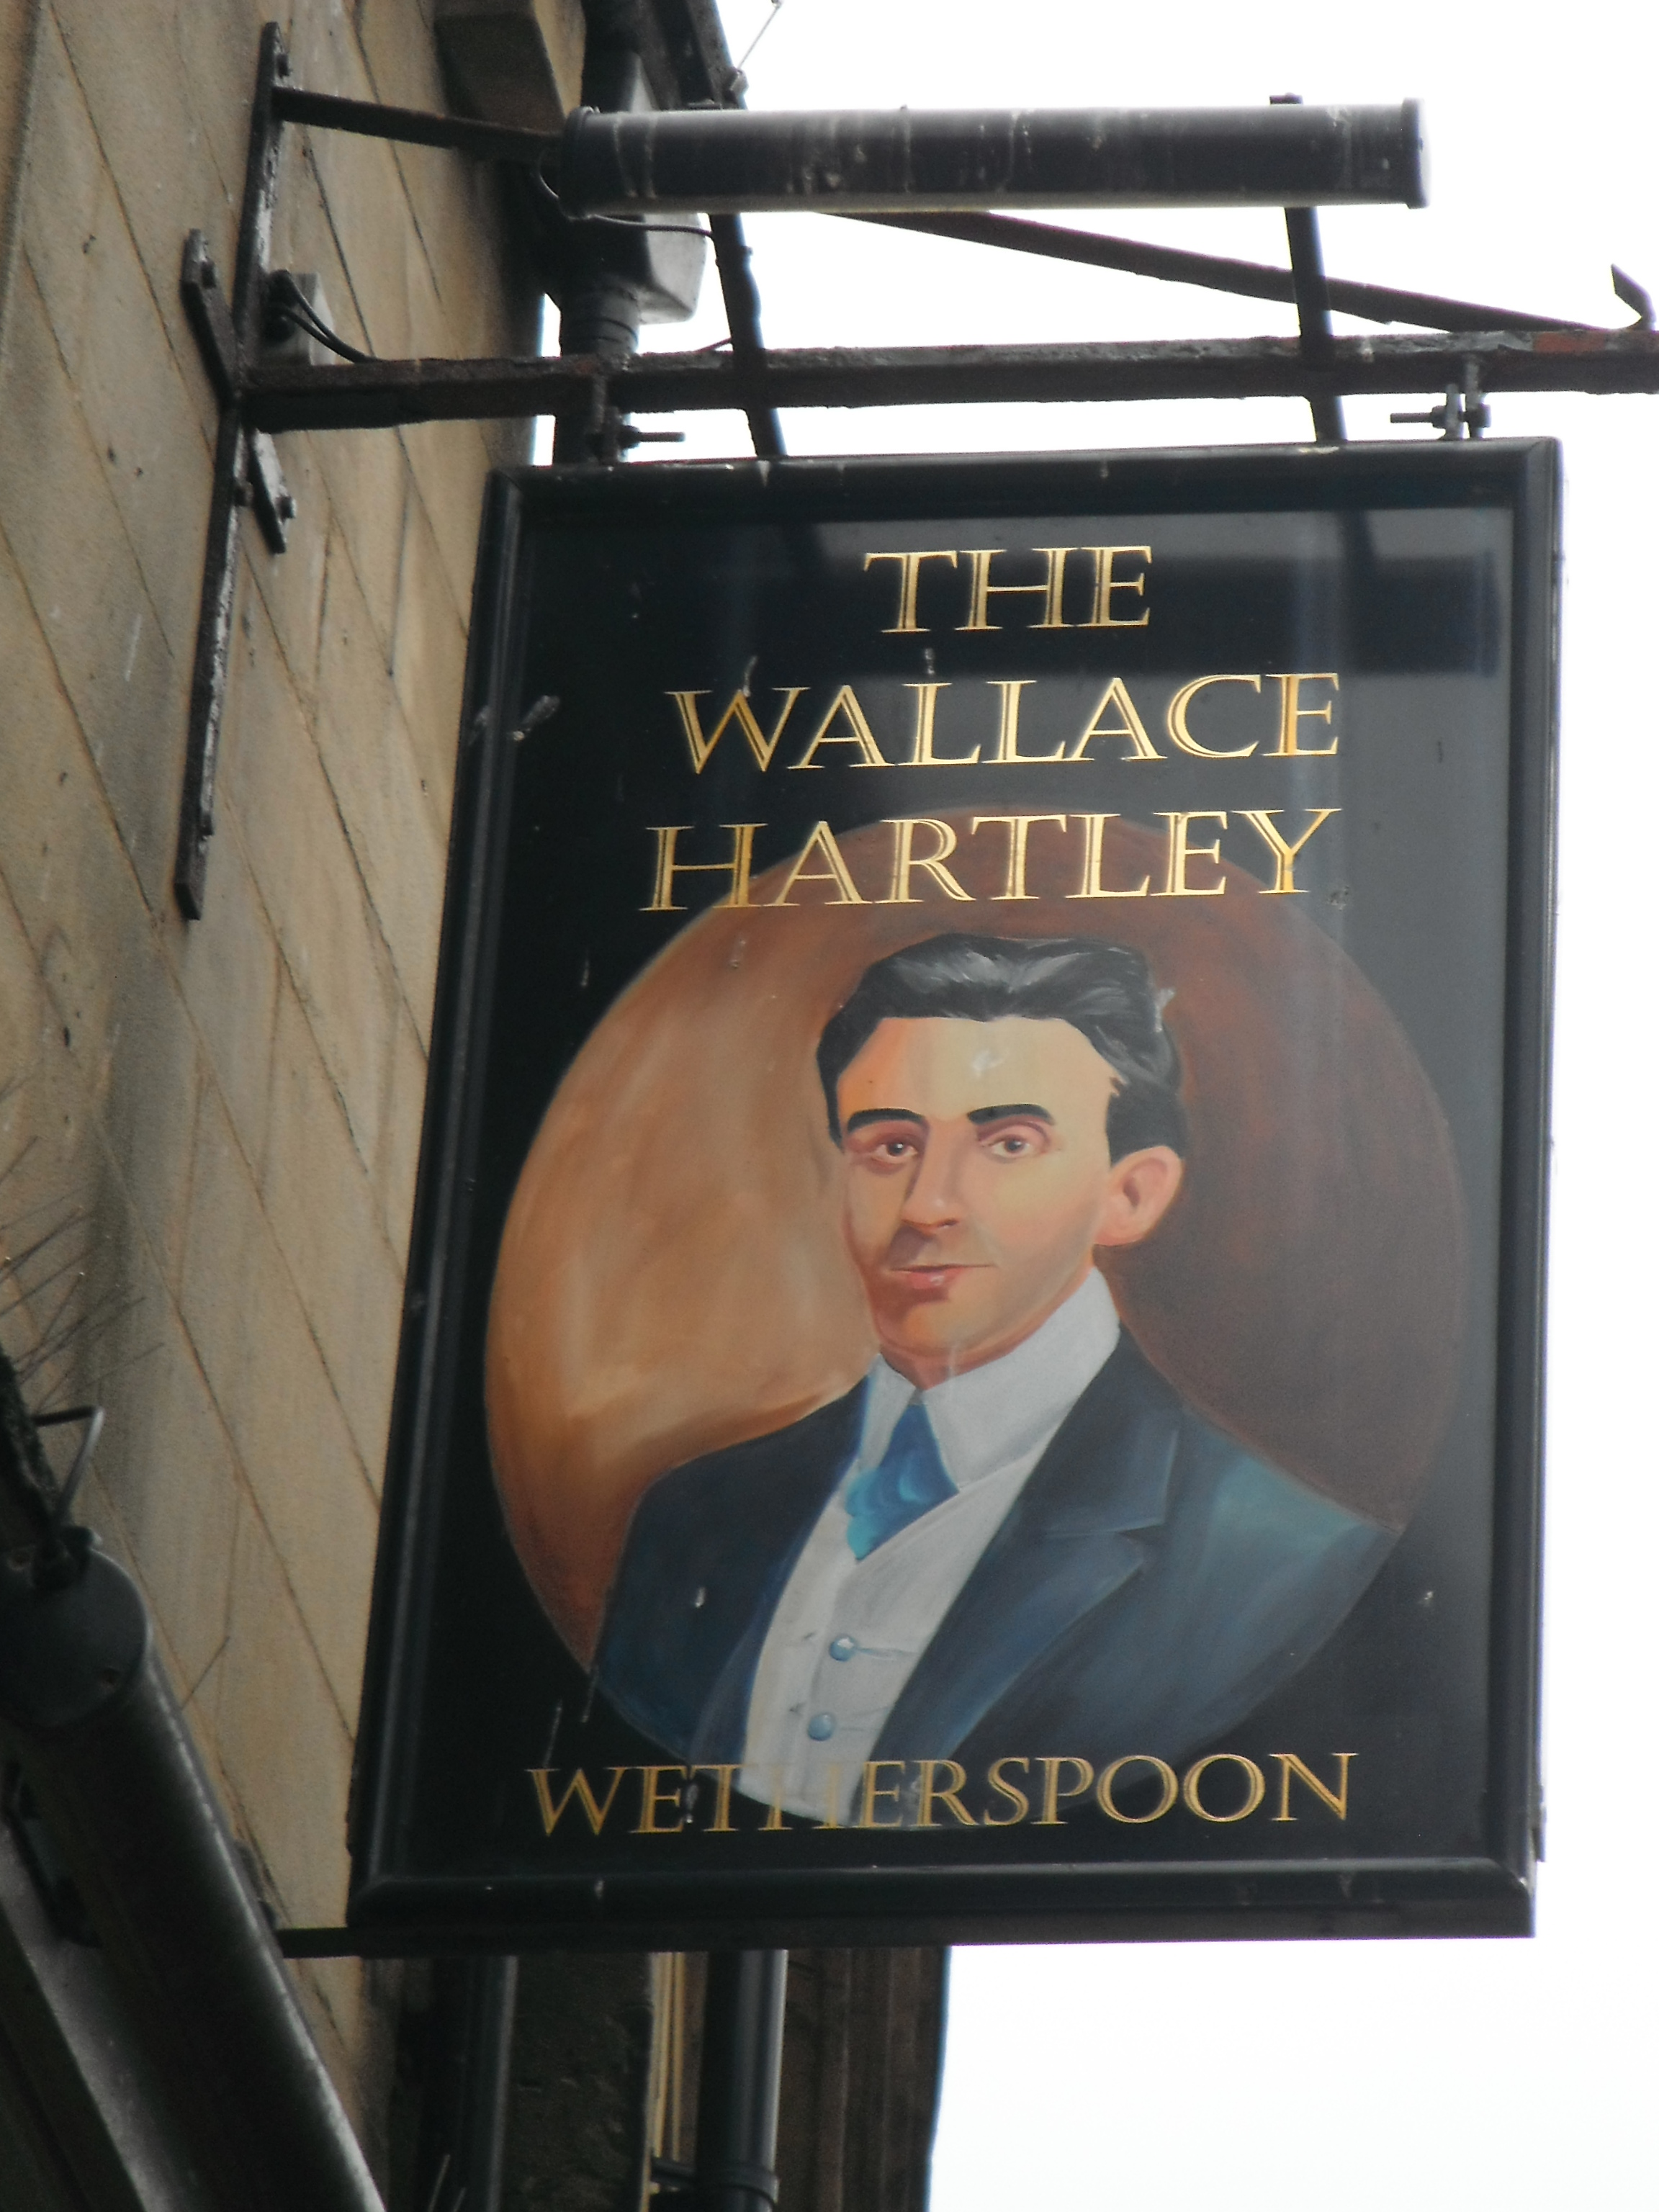 Photo taken by me - The Wallace Hartley pub sign - Colne Lancashire